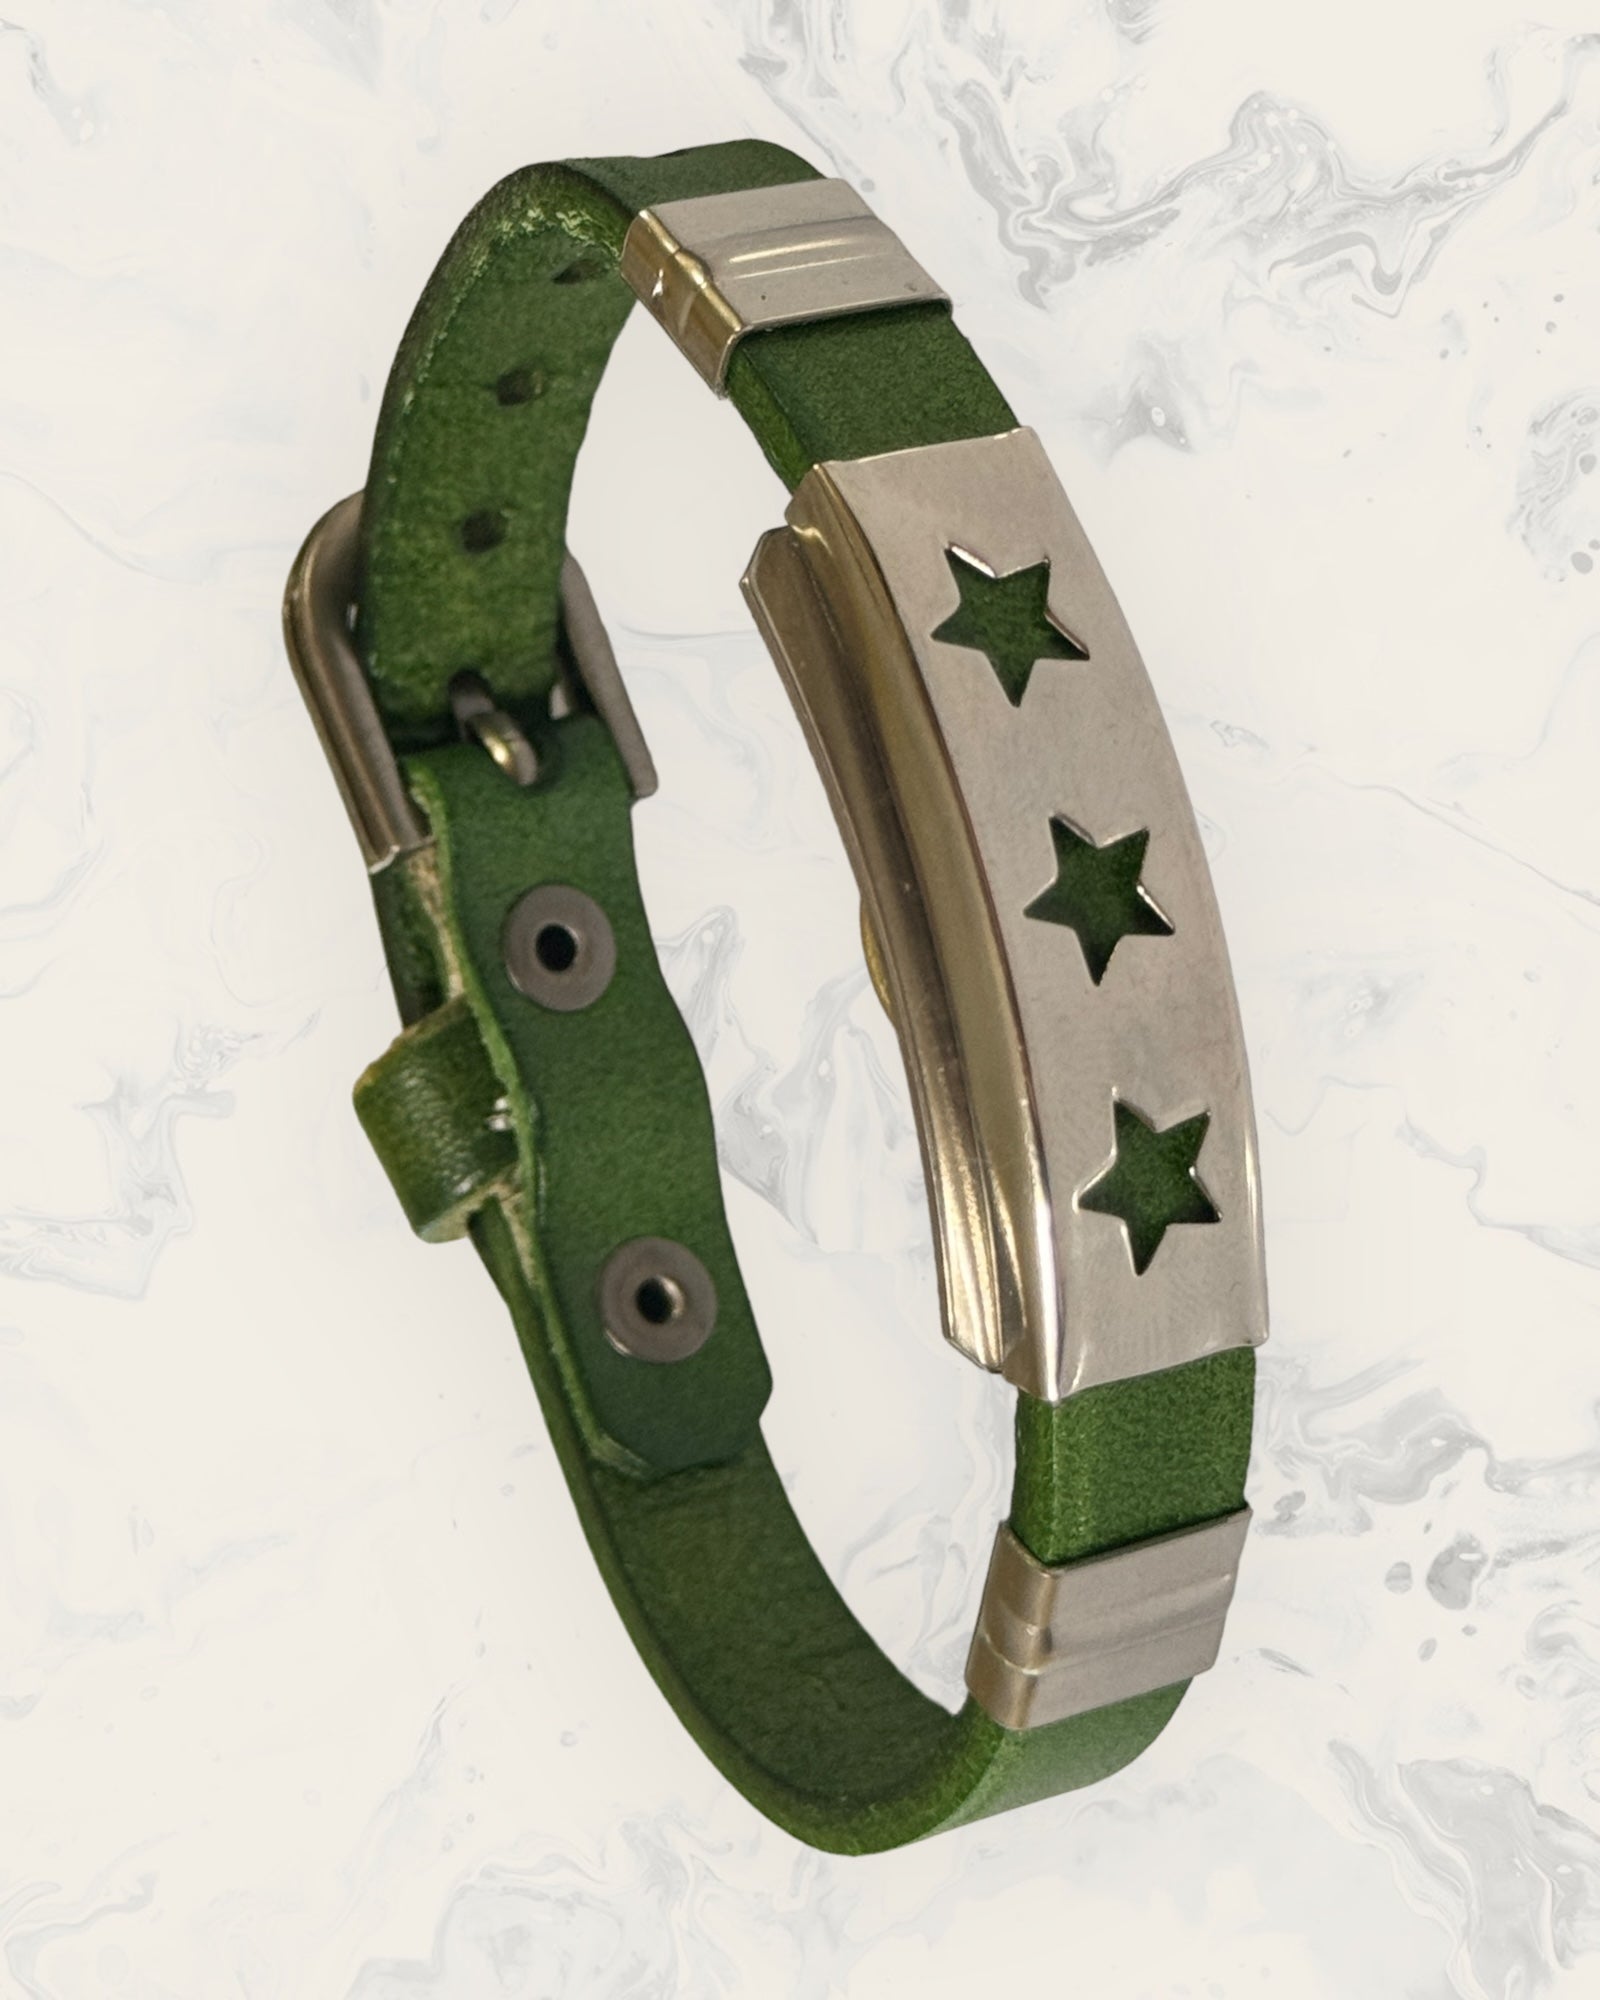 Natural Pain Relief and EMF Protection Bracelet Leather Band Color Green with a Star design on a silver metal slider